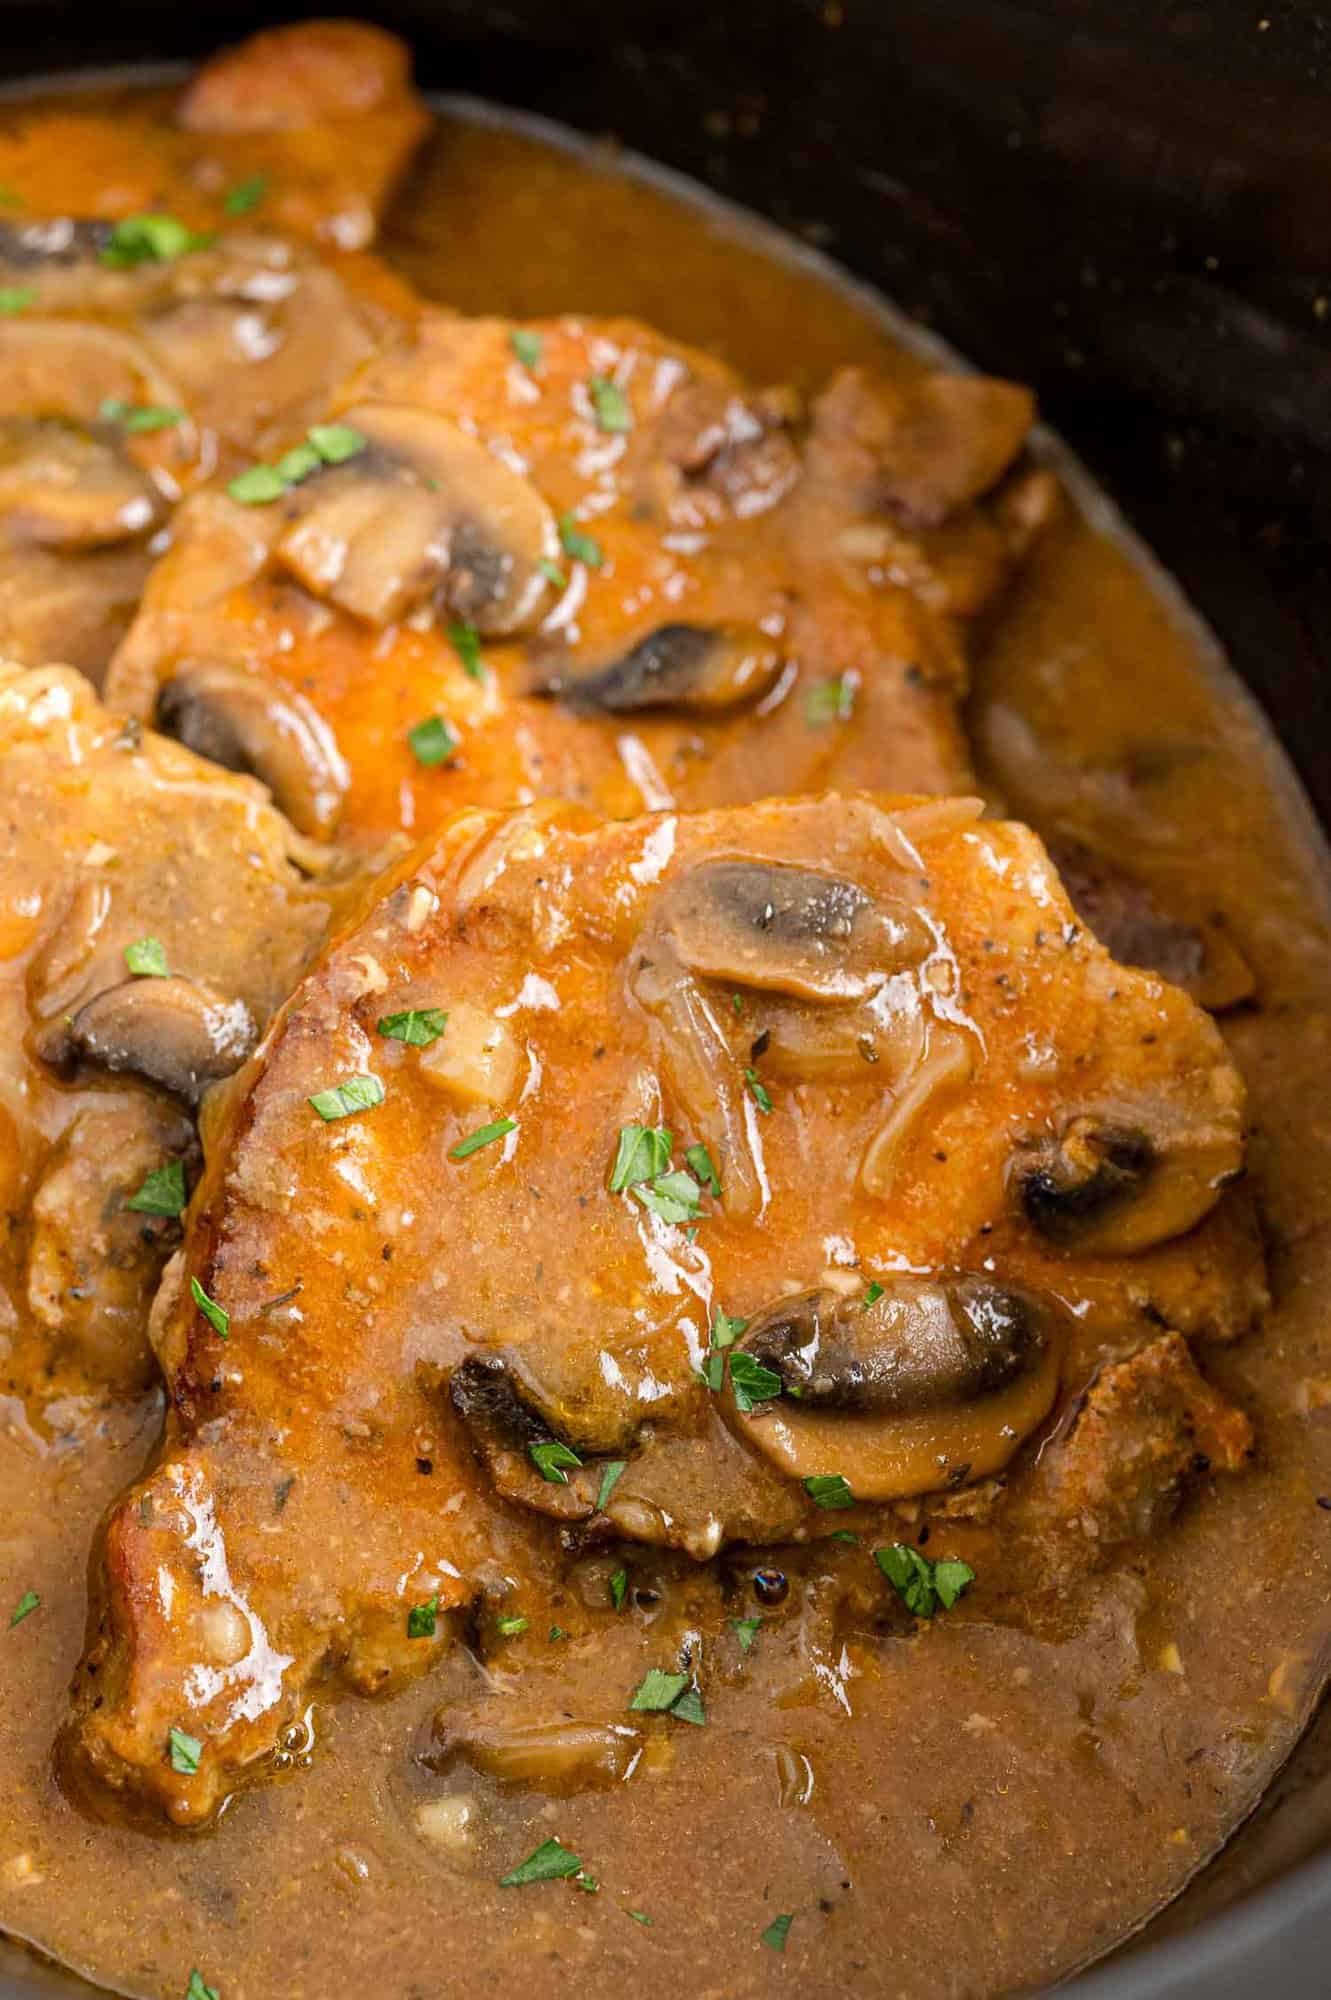 Pork chops covered in mushroom and onion gravy inside the slow cooker.